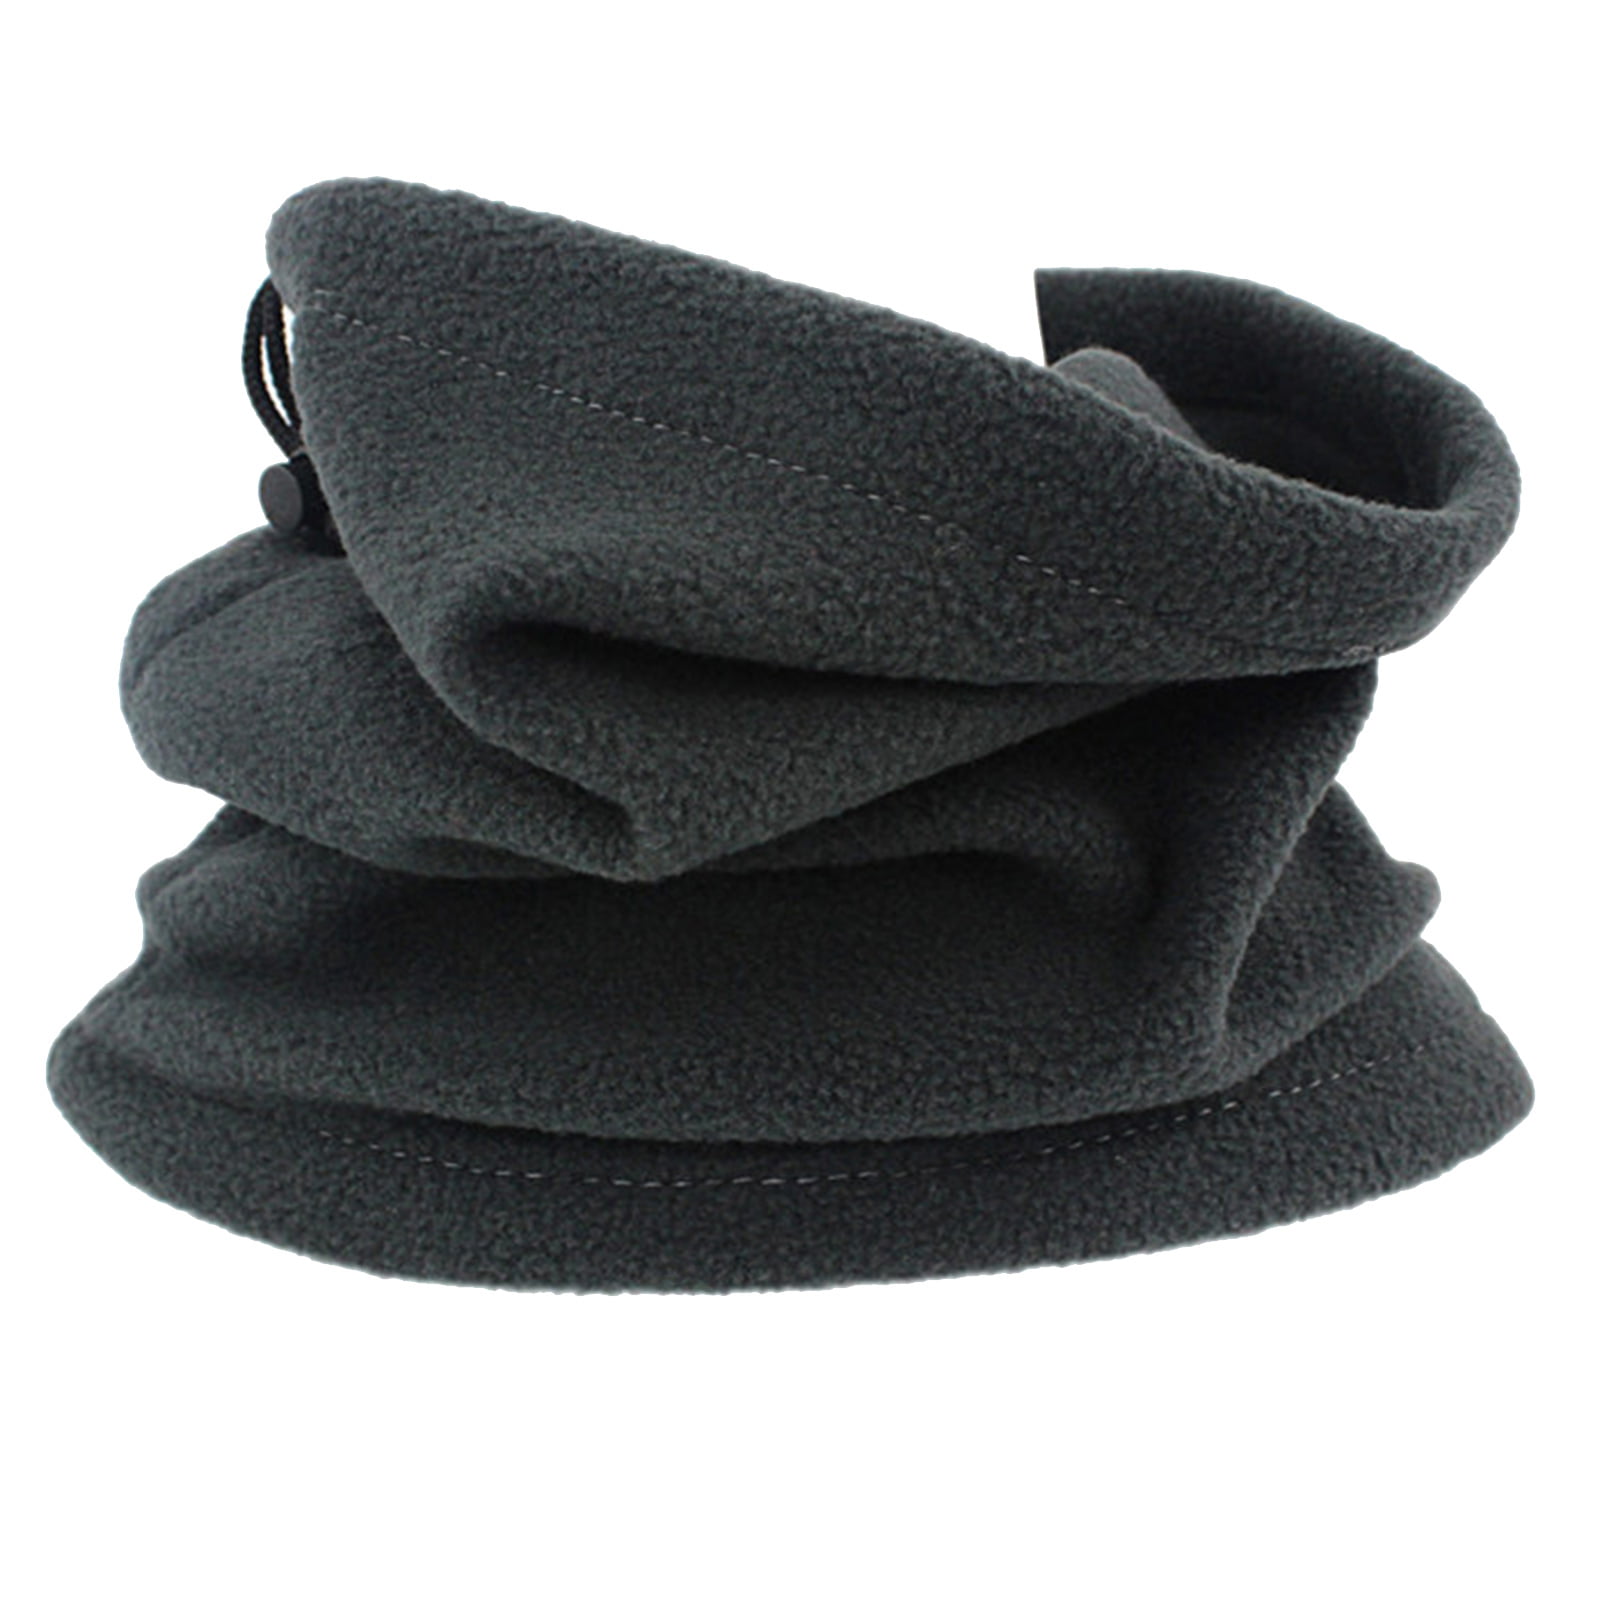 Details about   Winter Faux Fleece Neck Gaiter Warmer Cycling Drawstring Face Cover Scarf Tube 